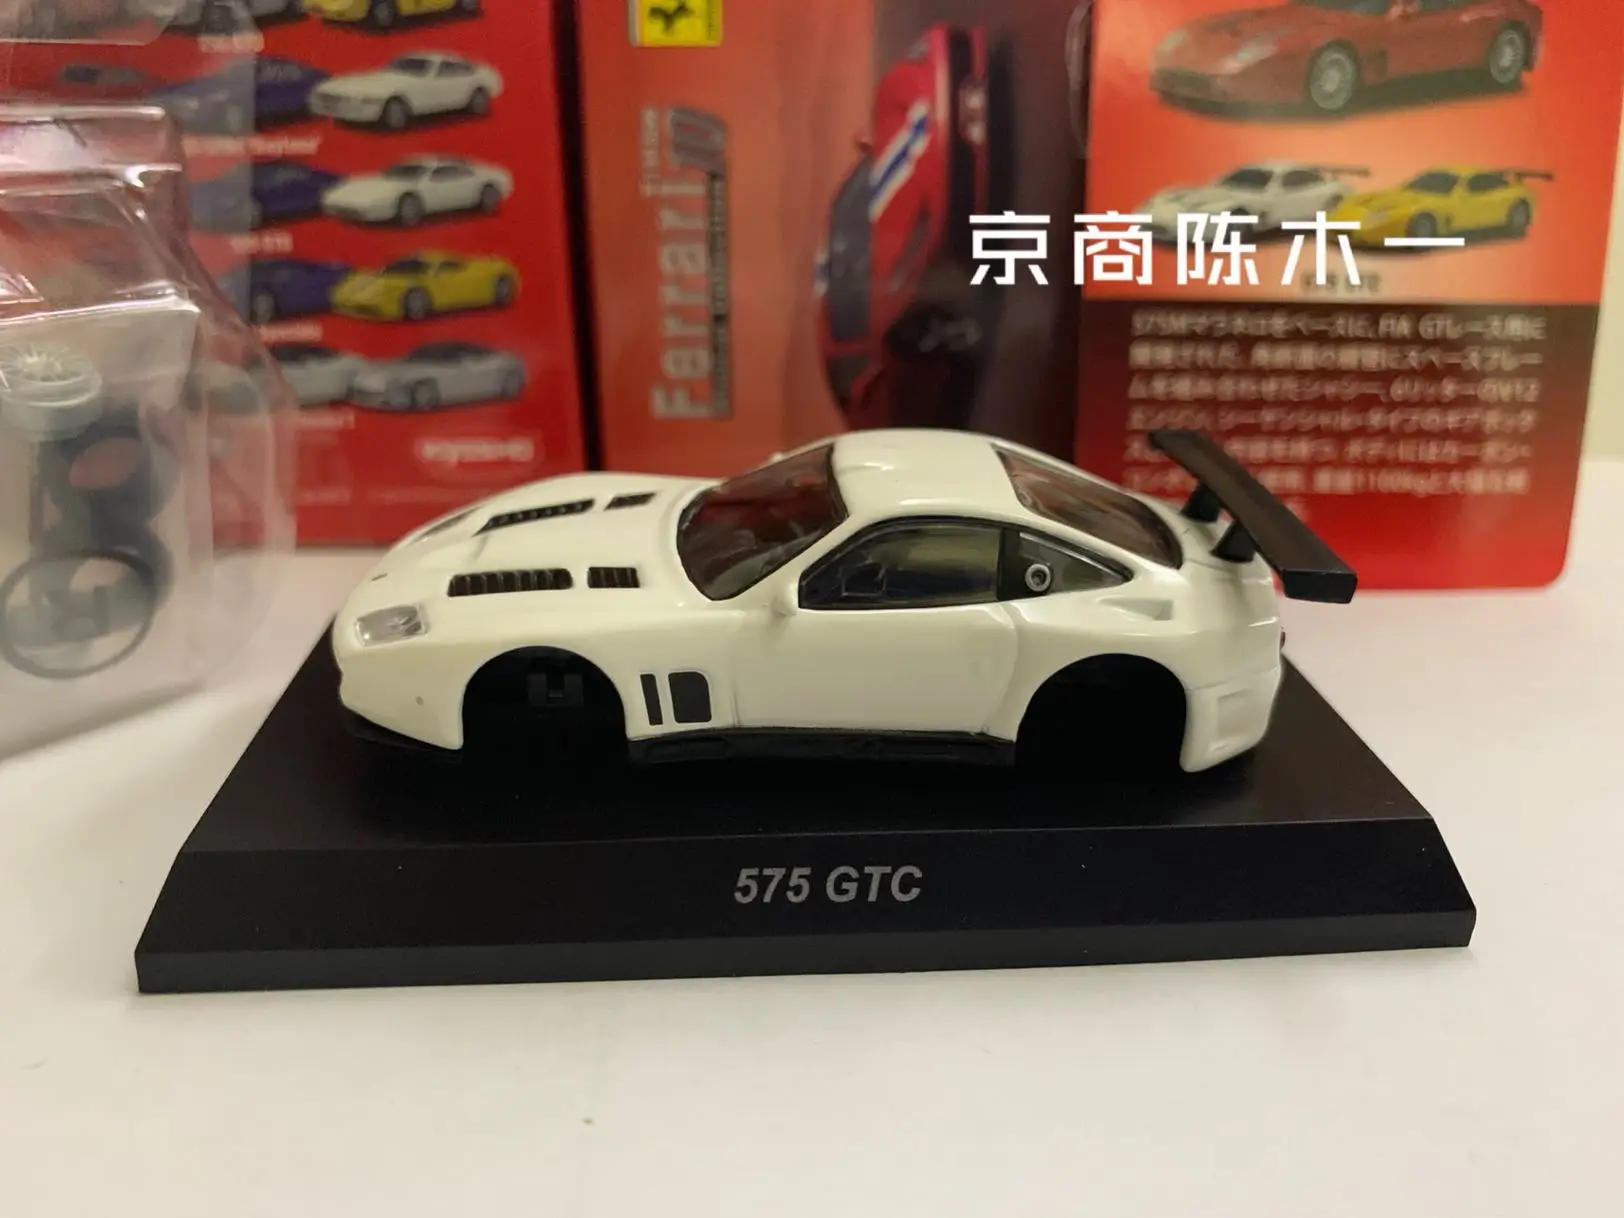 1/64 KYOSHO Ferrari 575 GTC LM F1 RACING Collection of die-cast alloy assembled car decoration model toys